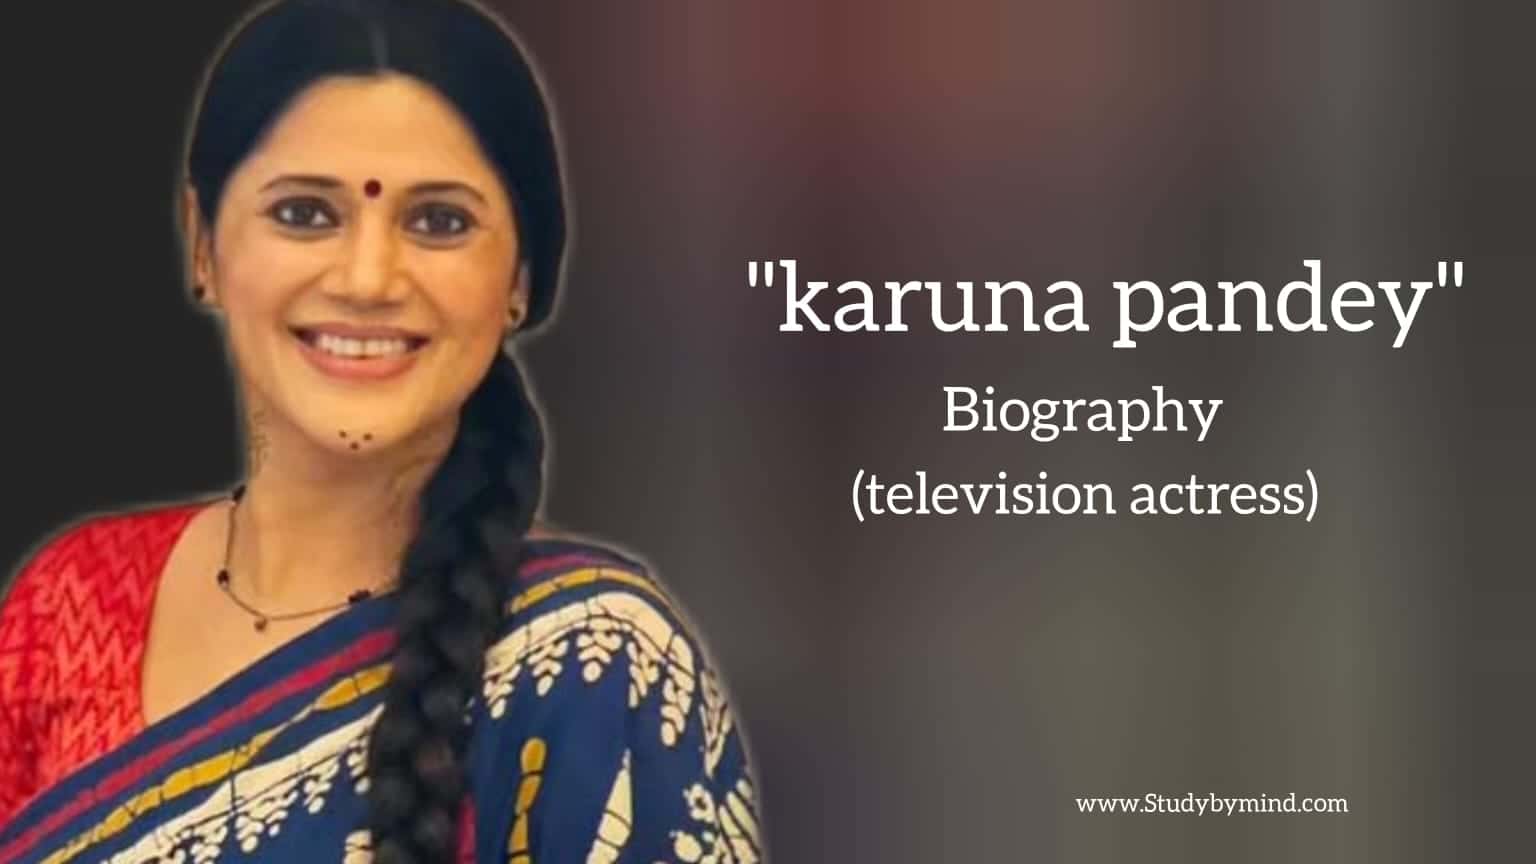 You are currently viewing Karuna pandey biography in english (Indian actress)